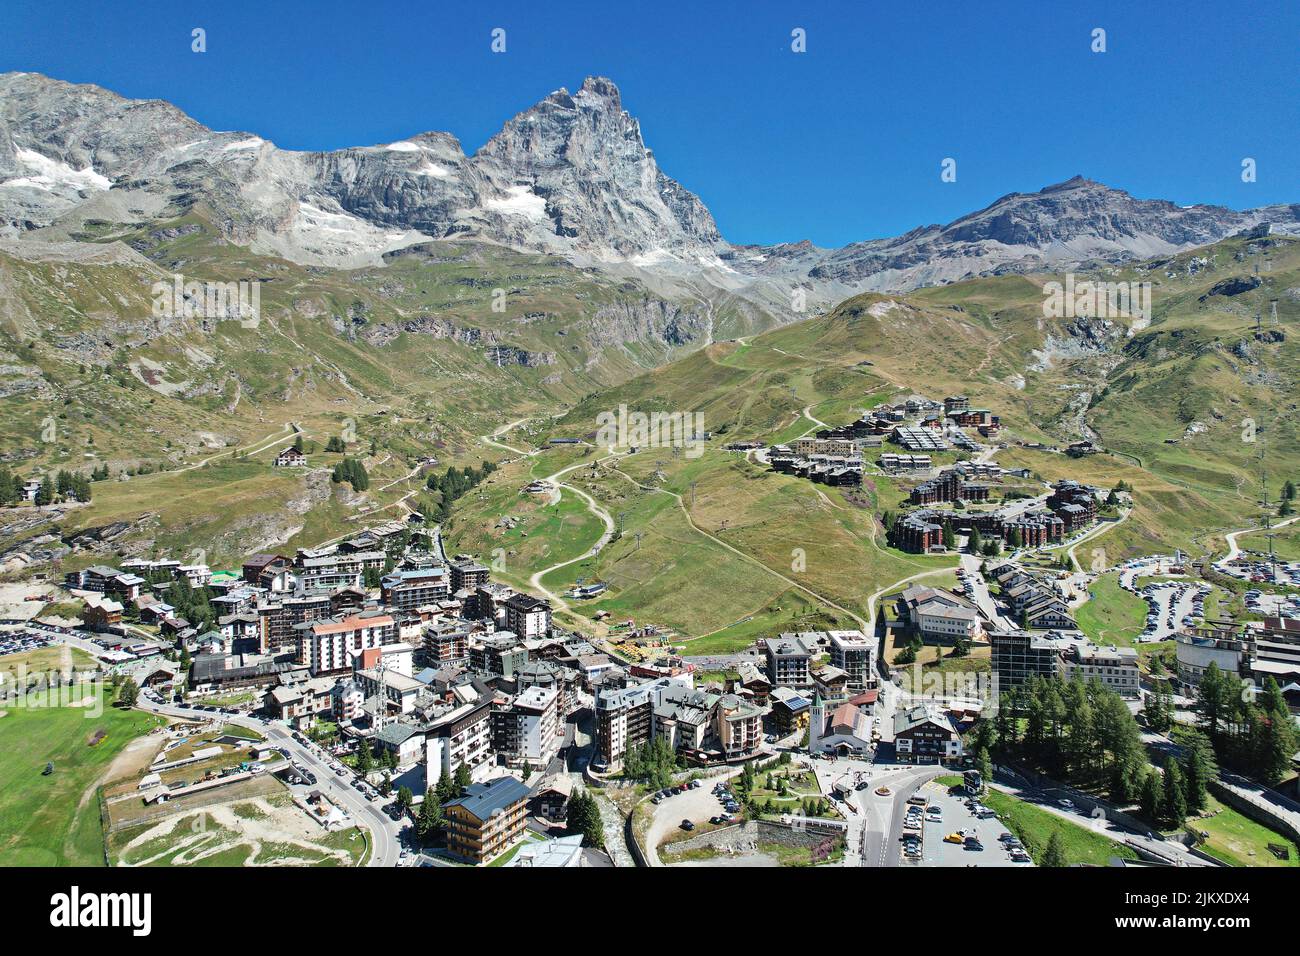 Panoramic view from above the village of Breuil-Cervinia with the Matterhorn in the background. Breuil-Cervinia, Italy - August 2022 Stock Photo